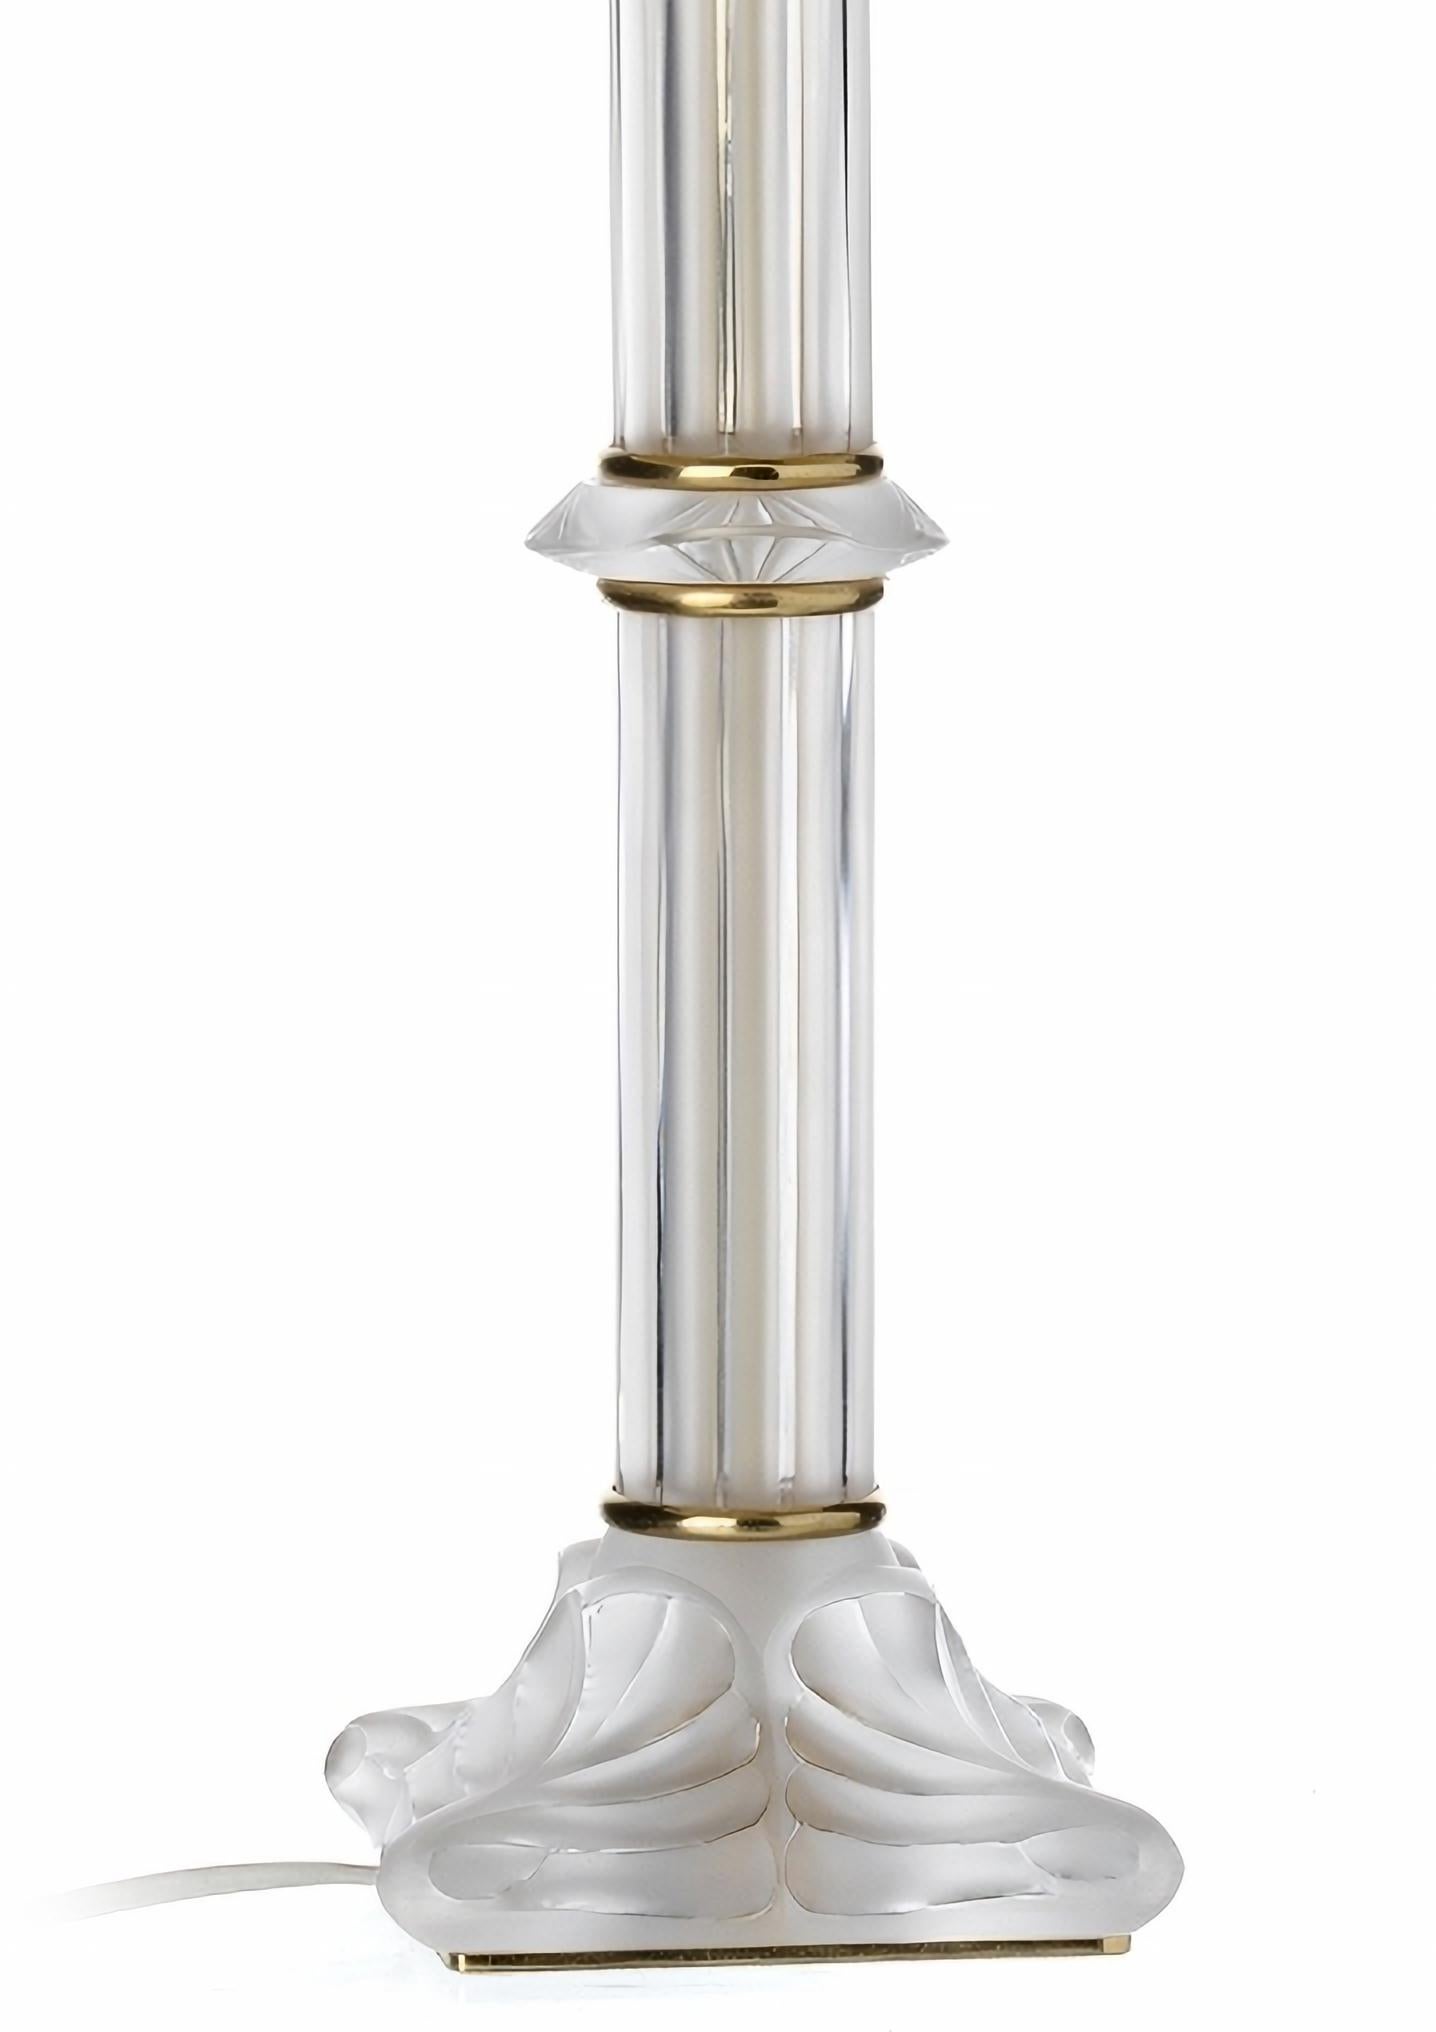 Lamp, Lalique

In moulded and relief crystal with gilt metal inlays, with abat-jour, signed Lalique, France'. 
Size: (height) 73.5 cm.
In excellent condition.